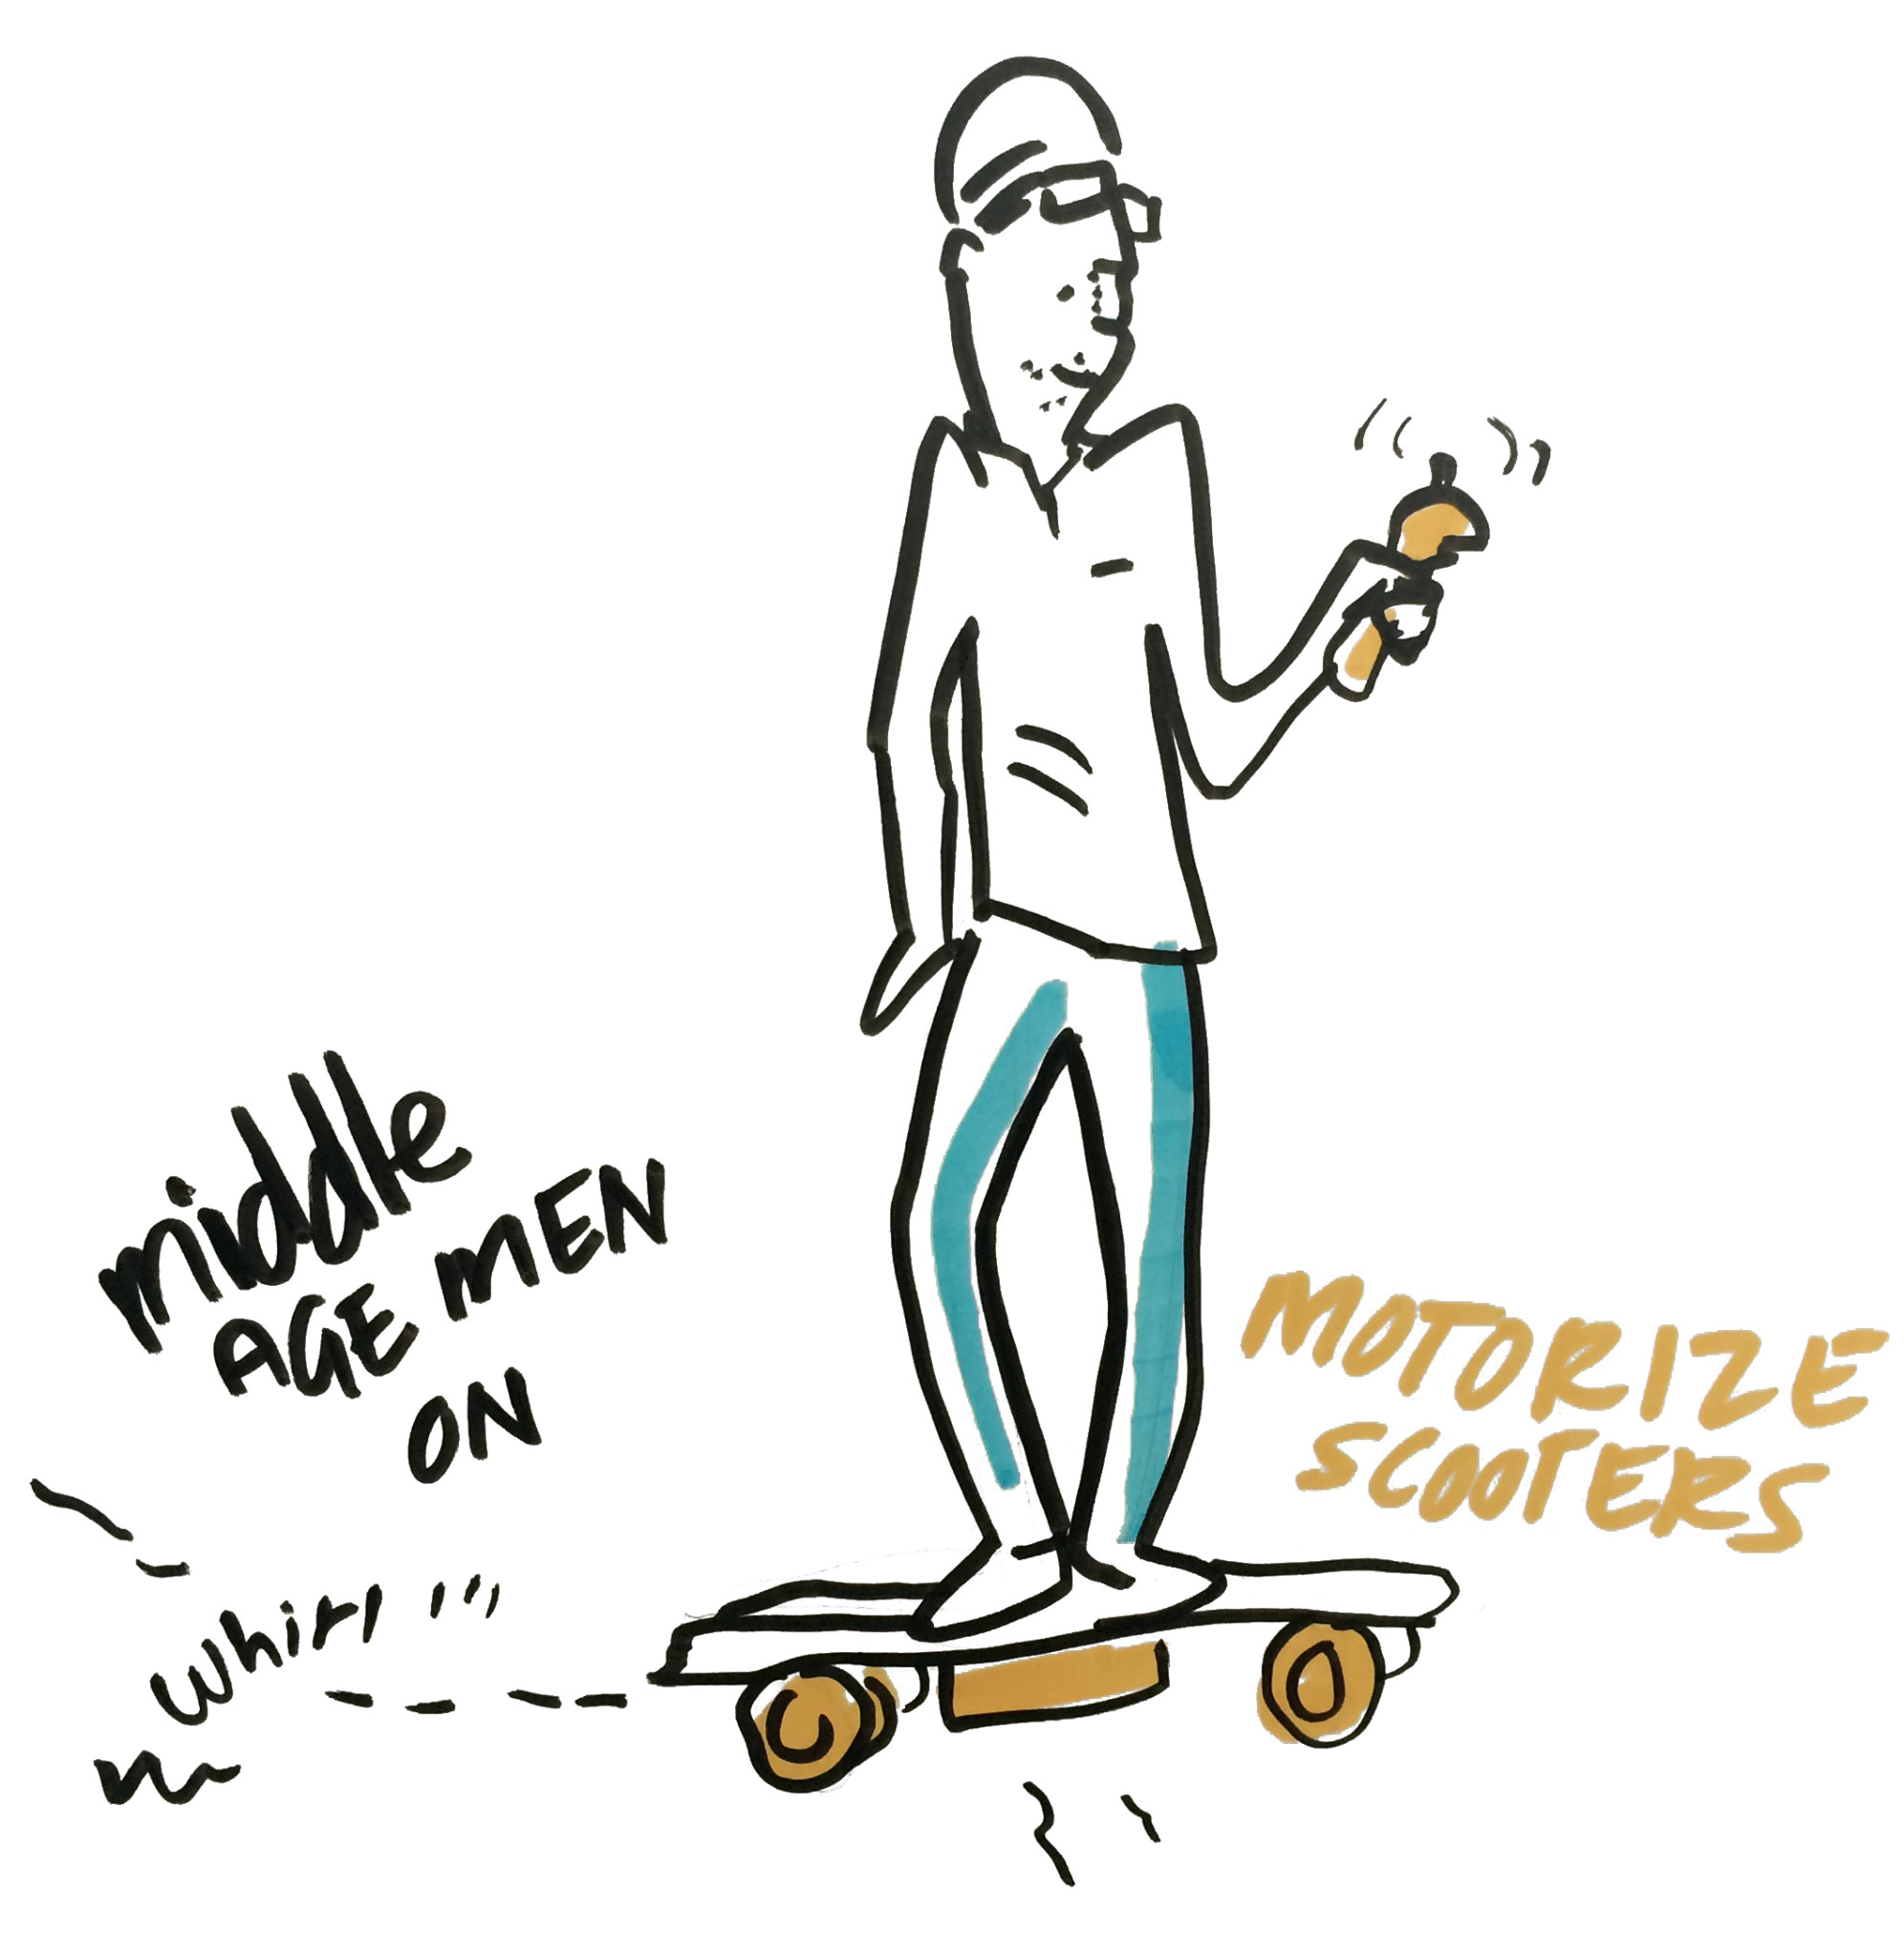 One of our favorite sights at SXSWi 2015 was all the middle aged men on motor scooters!